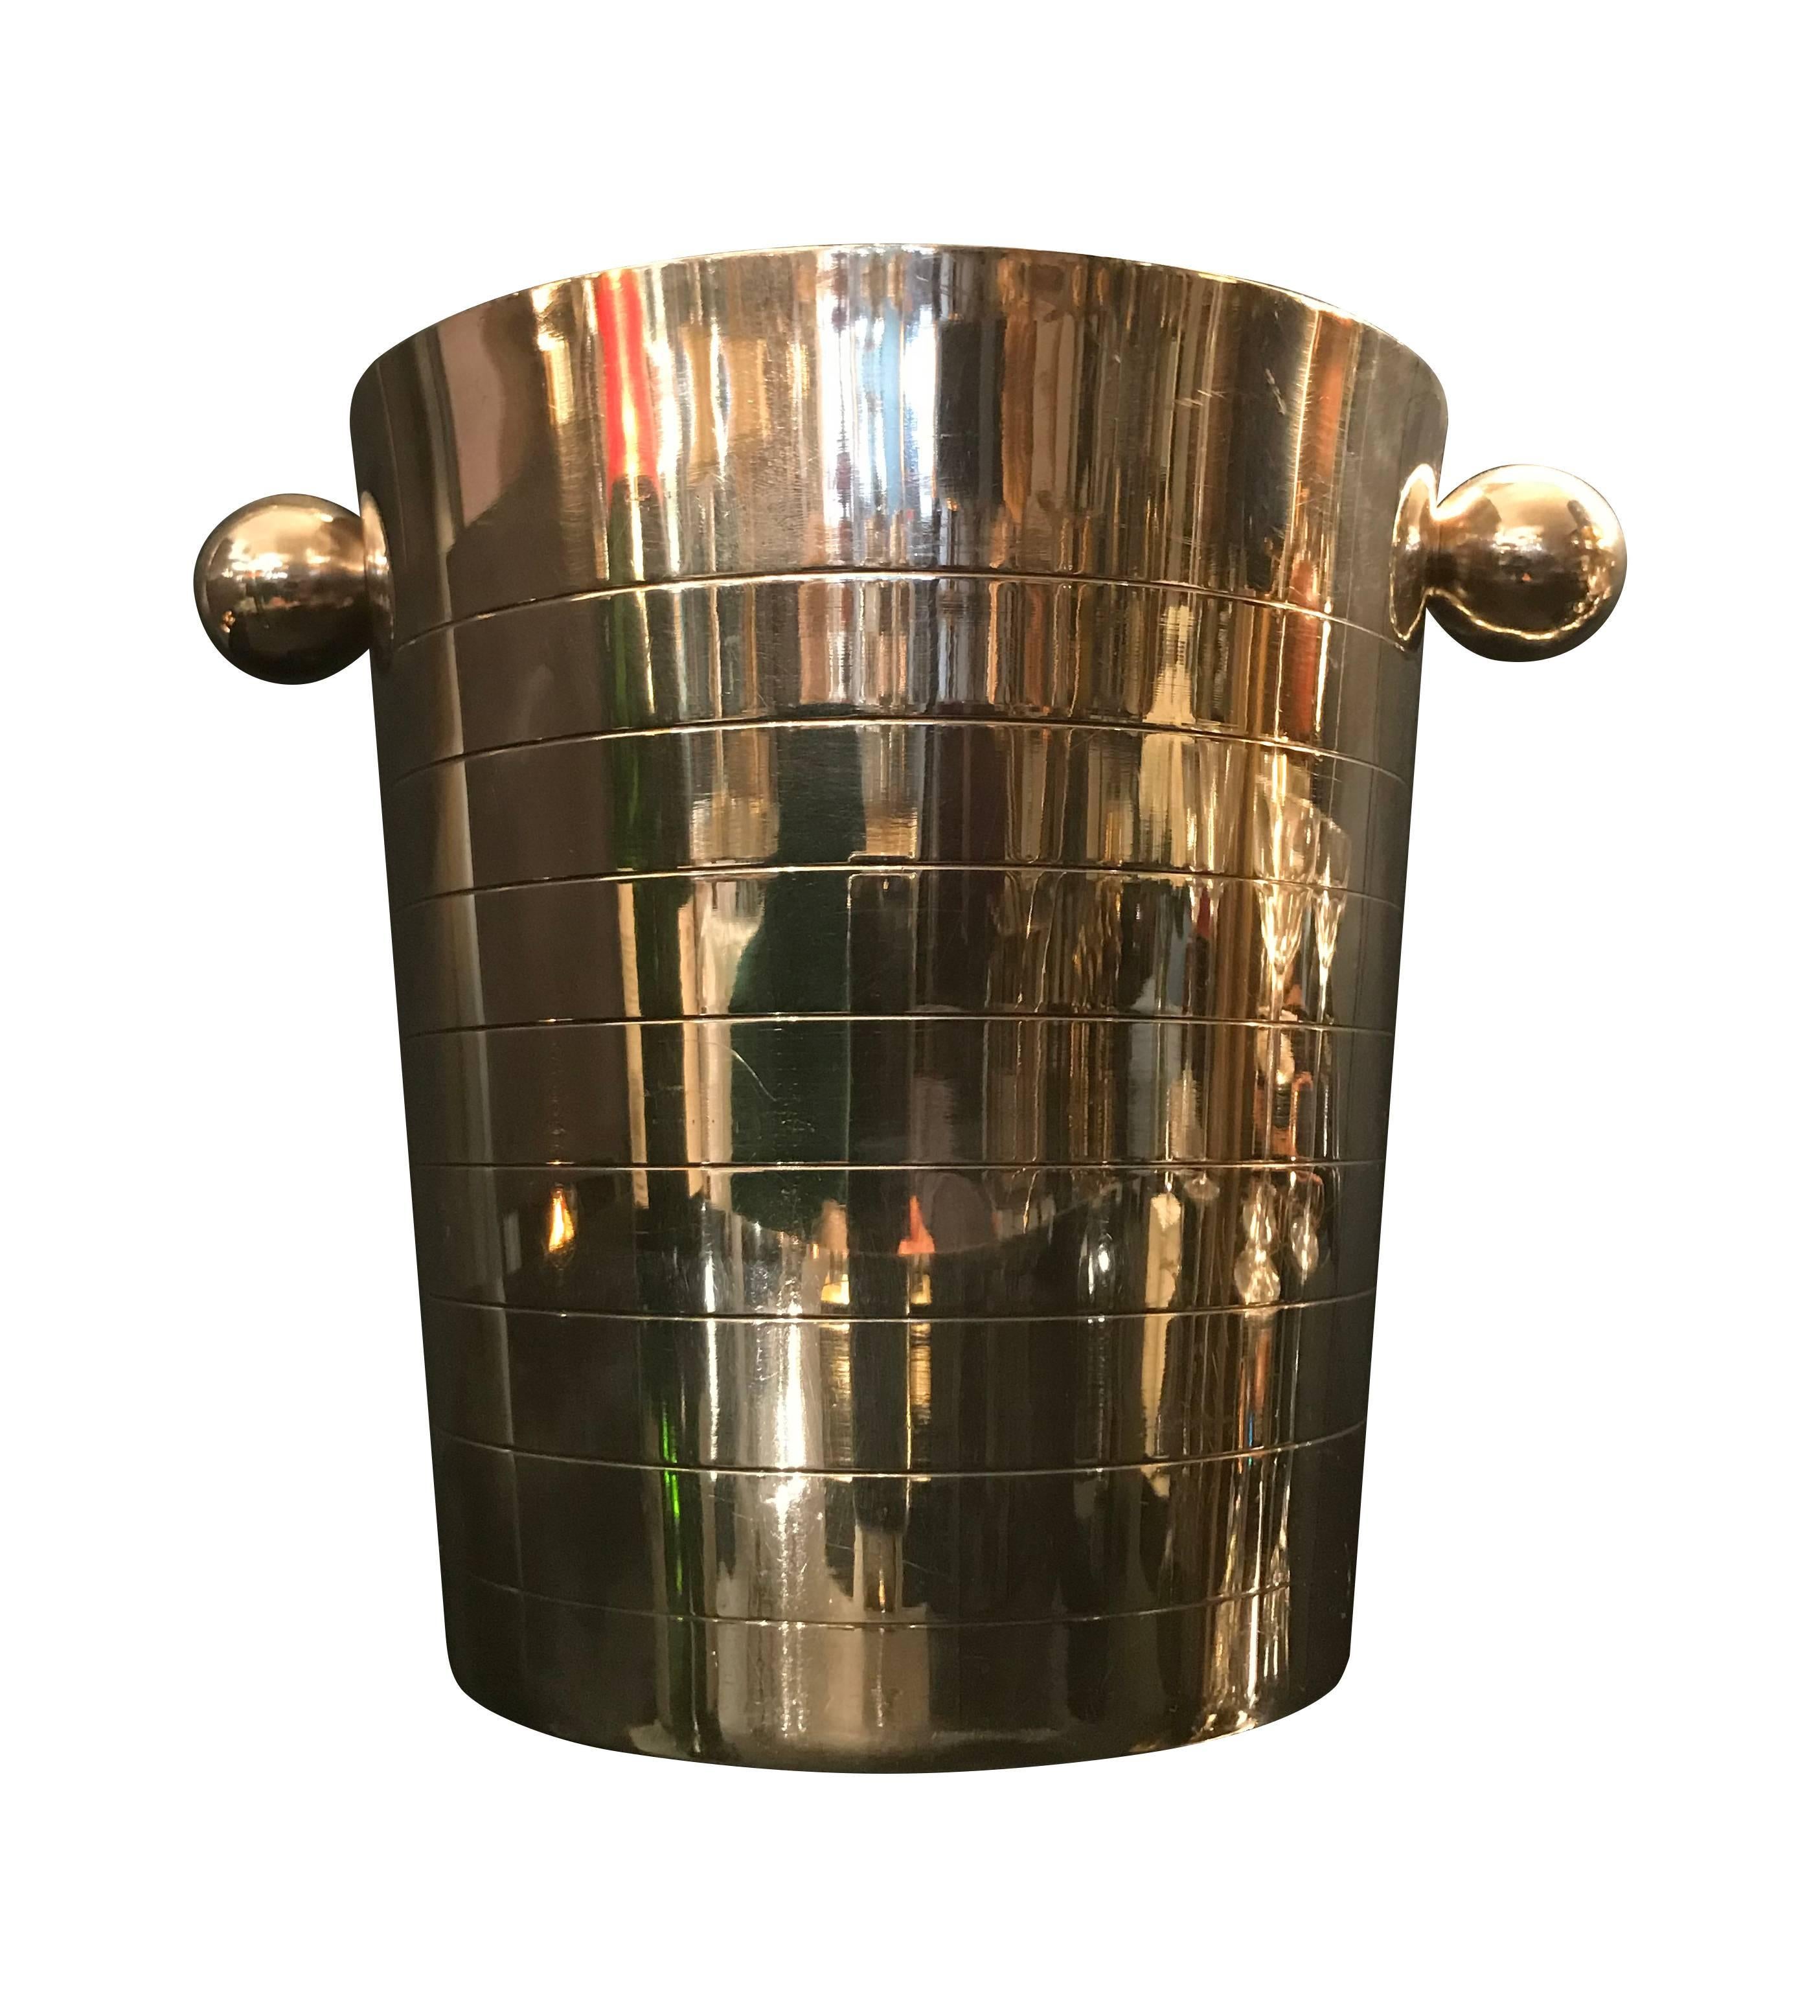 An Art Deco style silver plated ice bucket with clean design of concentric lines and ball handles.